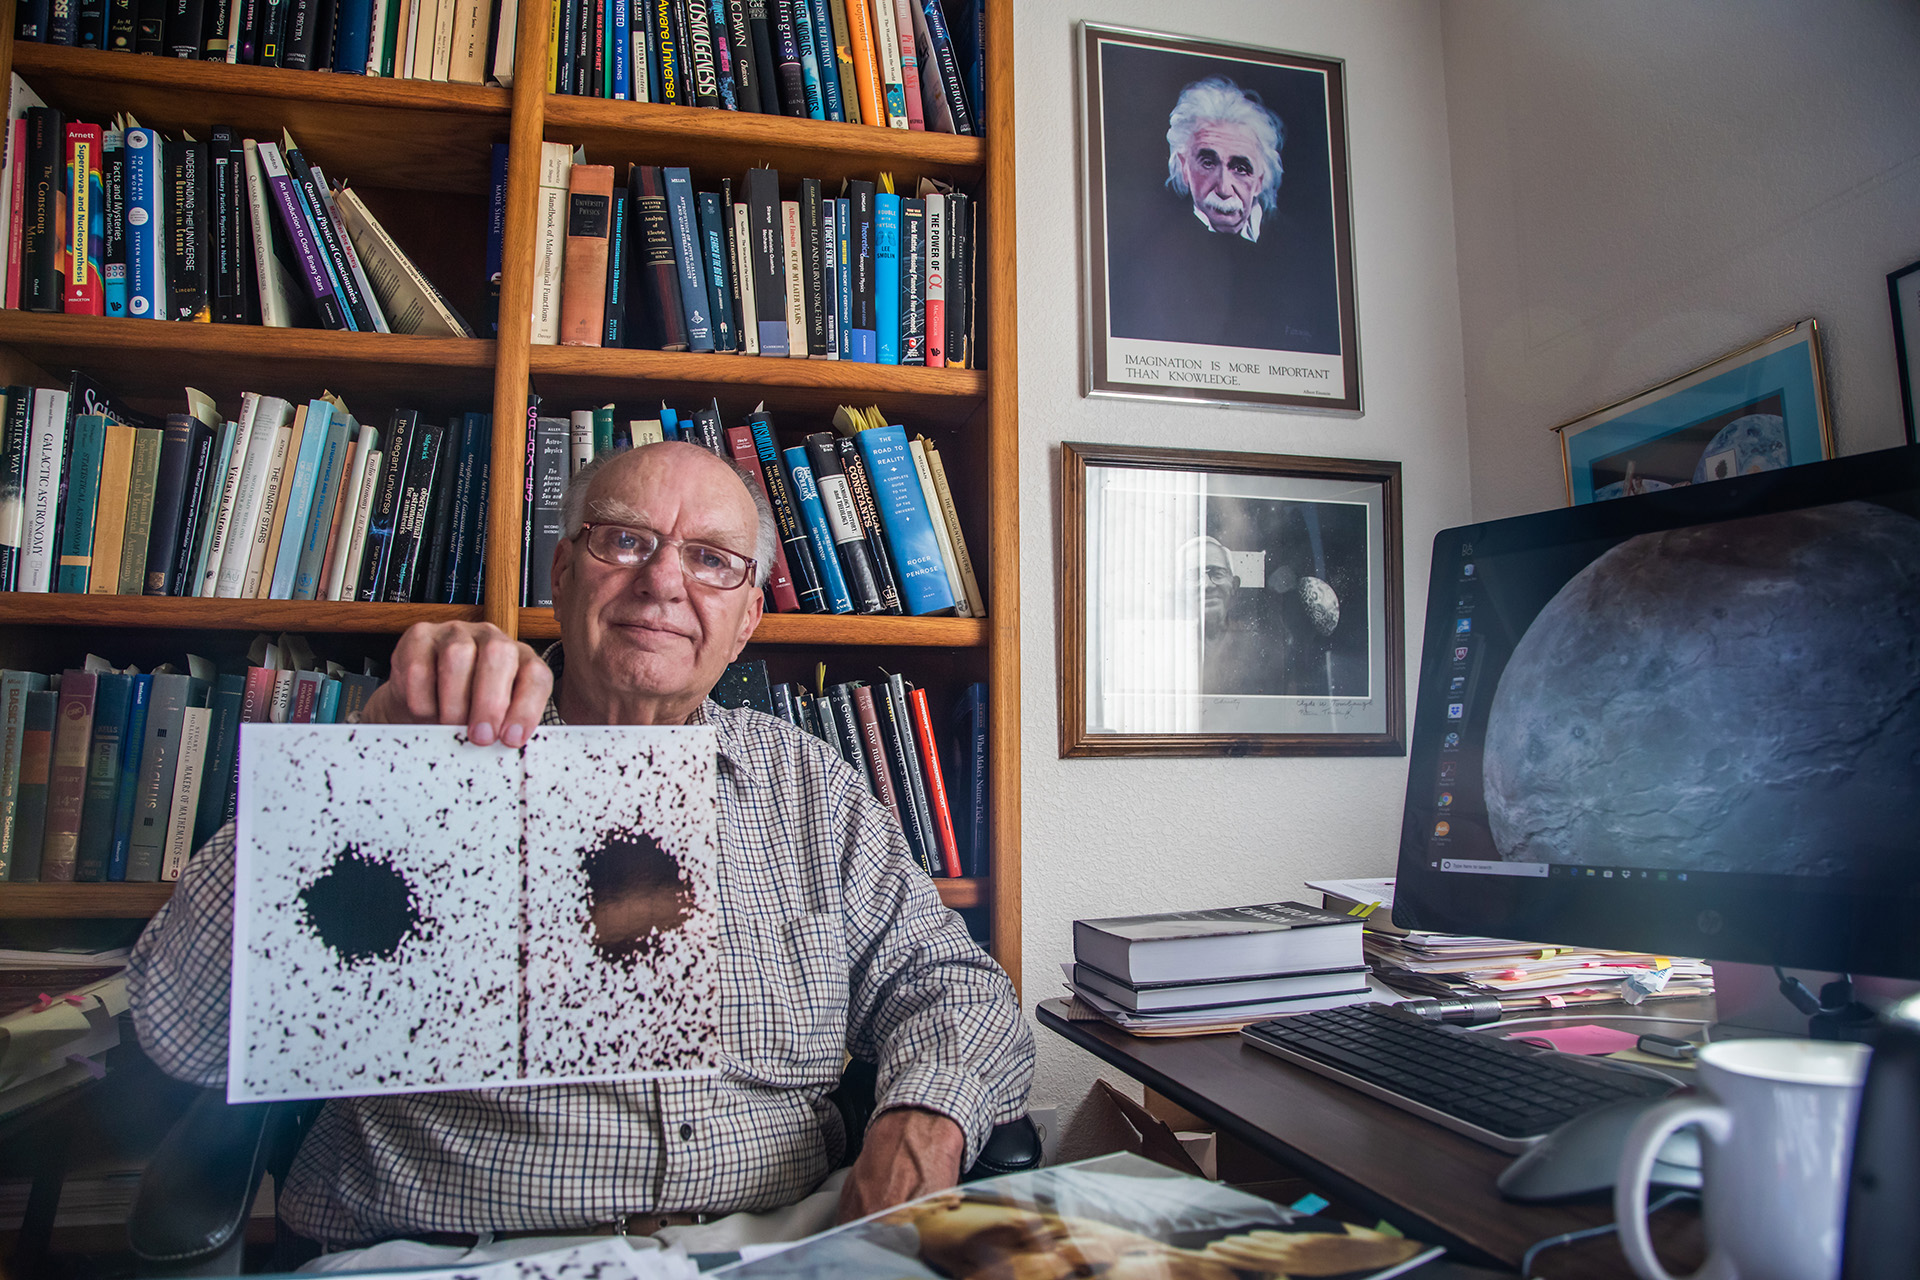 Jim Christy holding his original Charon discovery image in 2018.